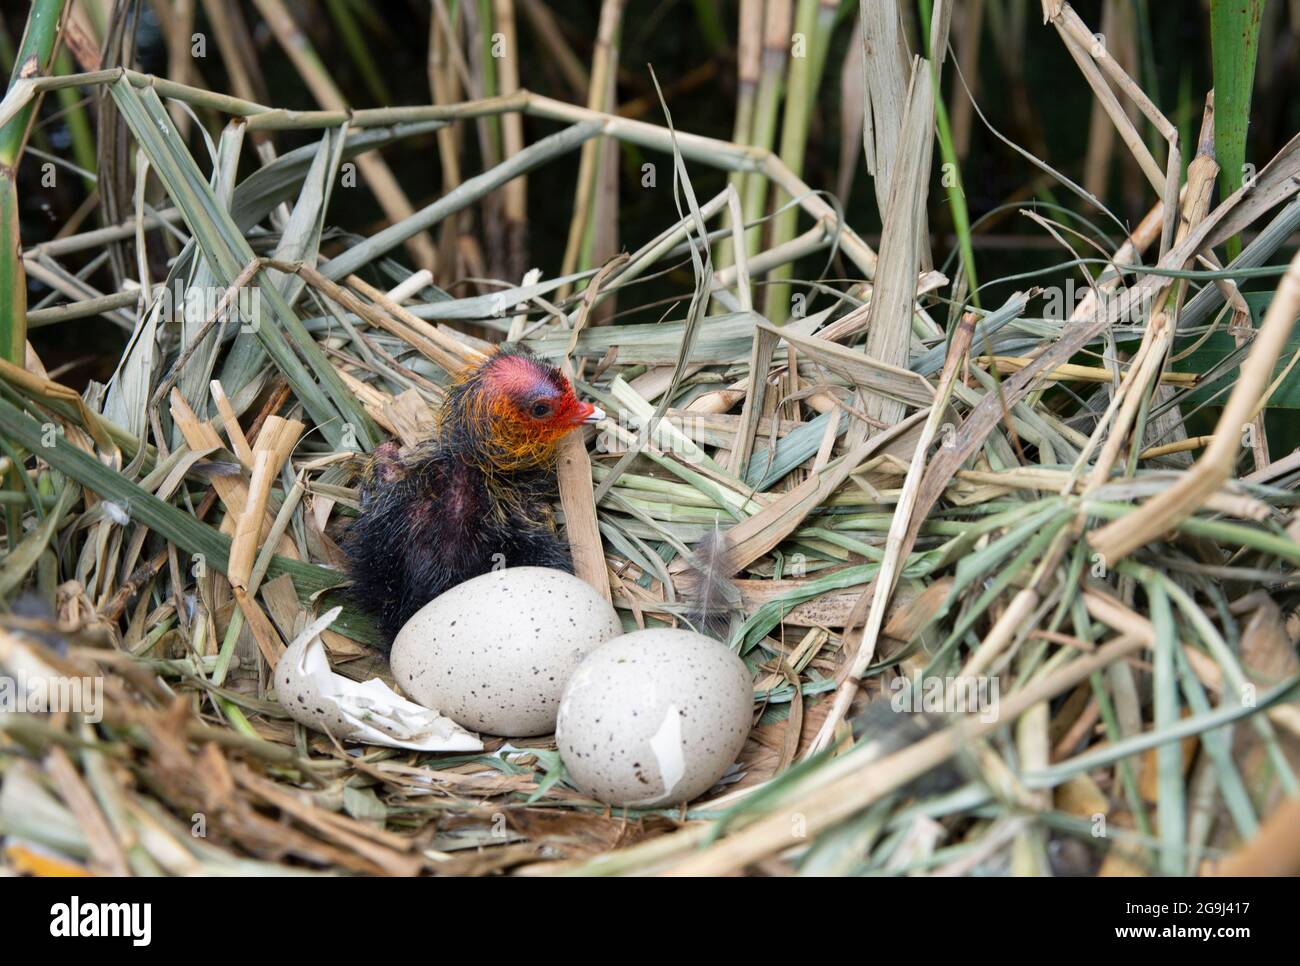 Eurasian Coot nest with eggs and precocial chick, Fulica atra, Brent Reservoir, London, United Kingdom Stock Photo